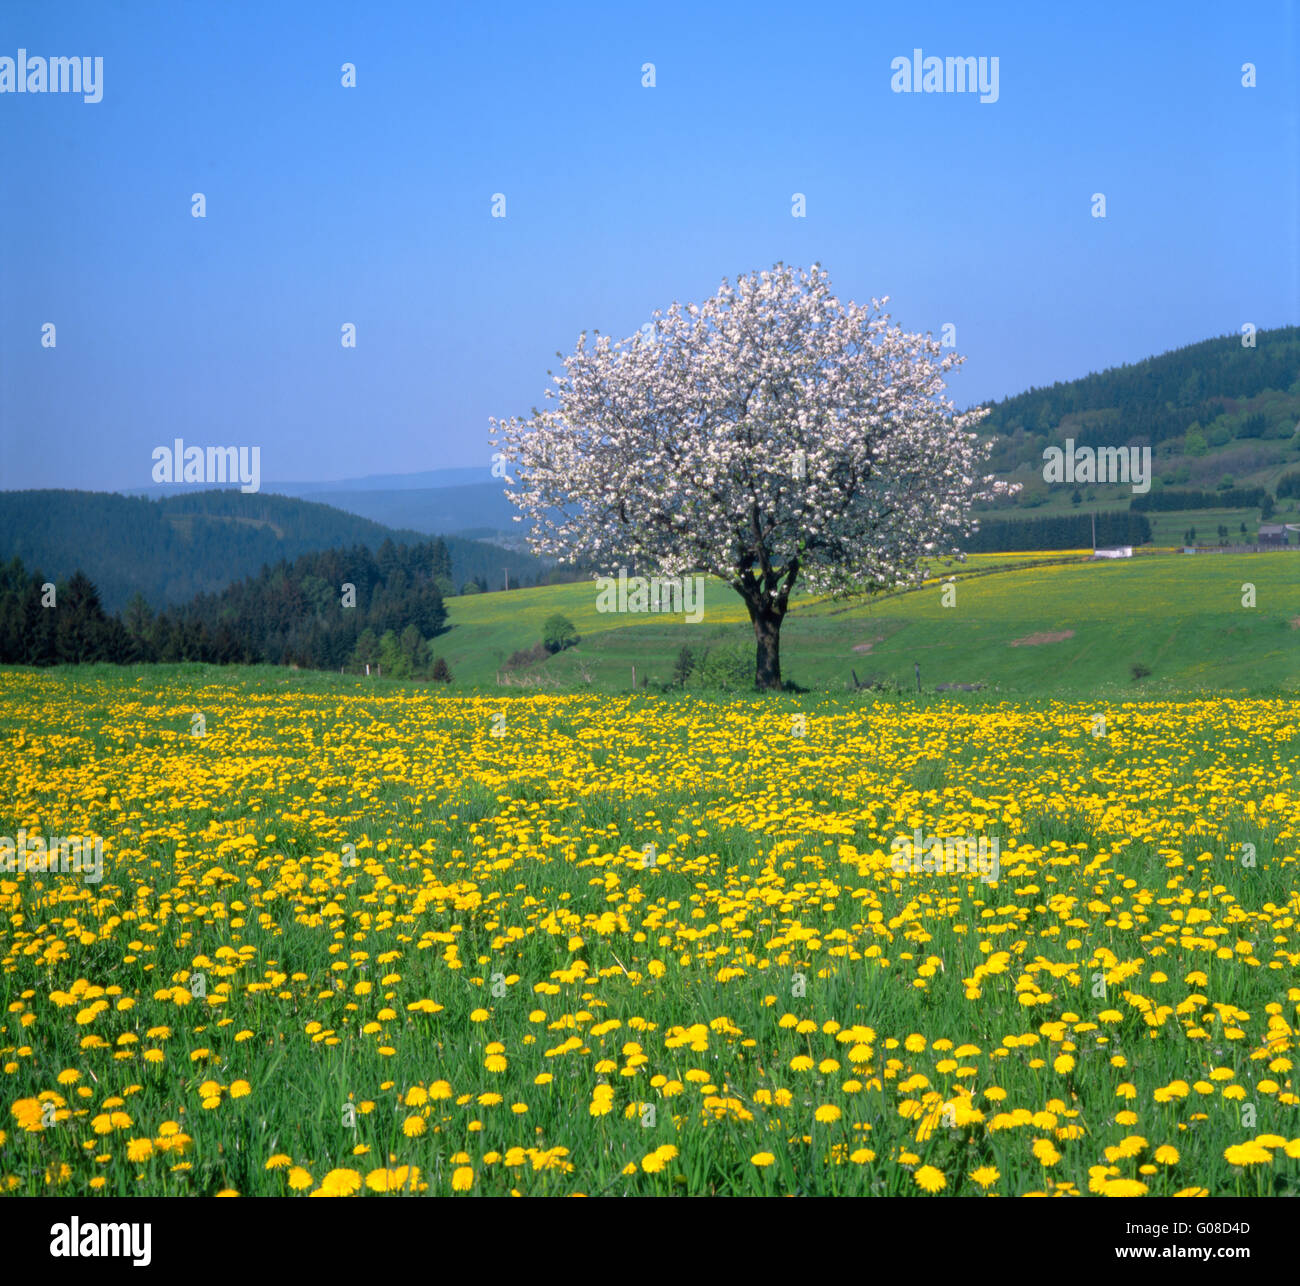 Dandelion meadow with lonely blossoming fruit tree Stock Photo